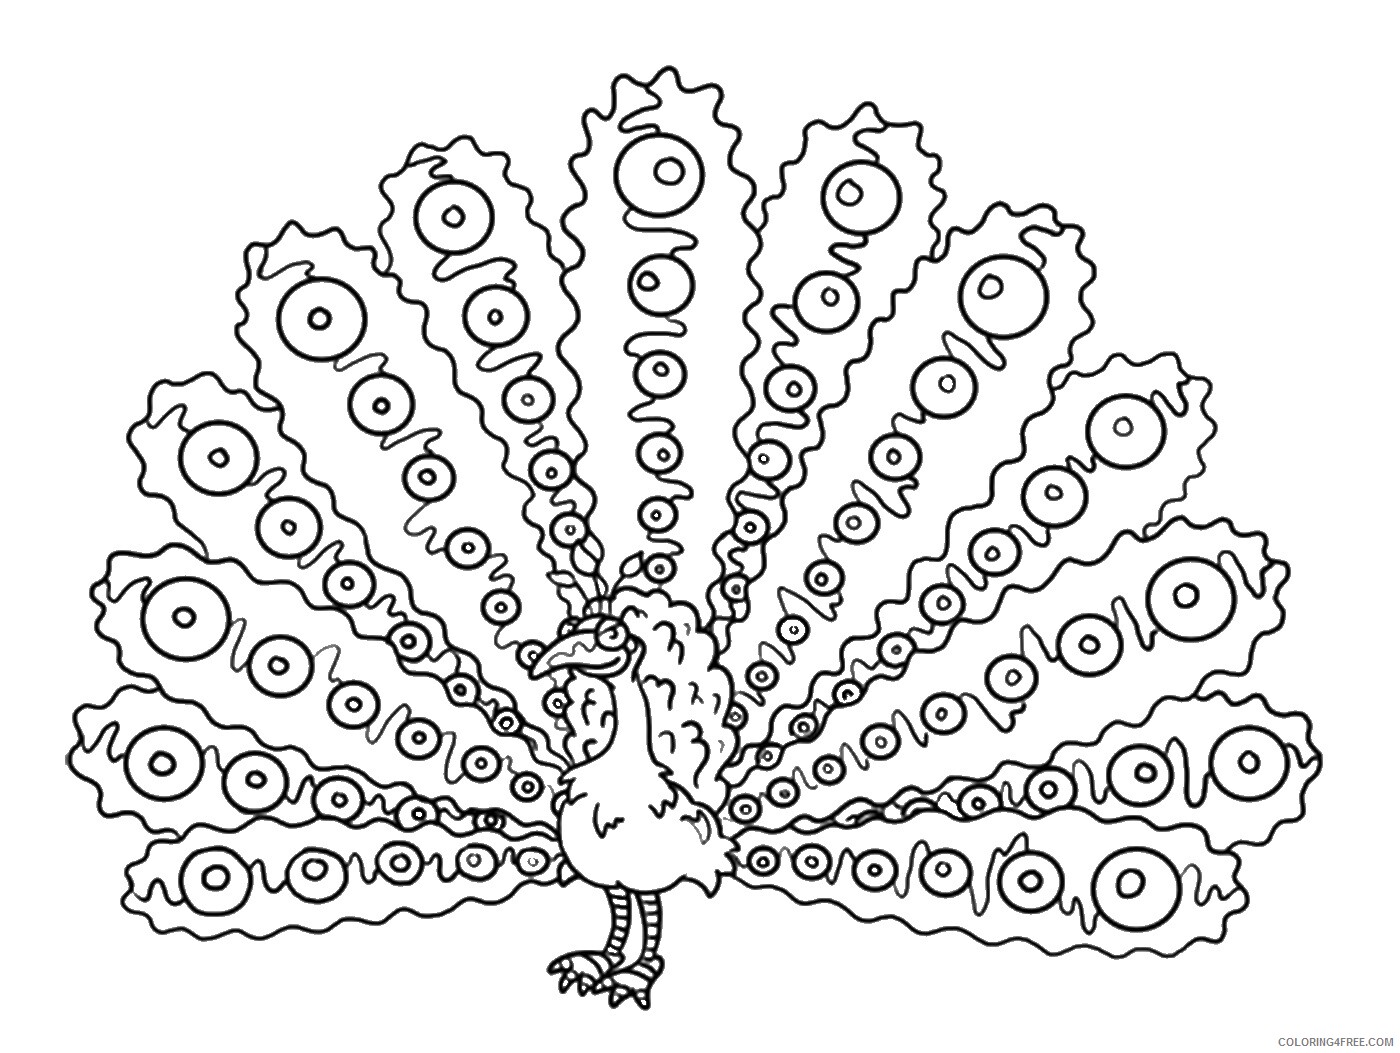 Peacock Coloring Pages Animal Printable Sheets peacock_cl_2 2021 3767 Coloring4free